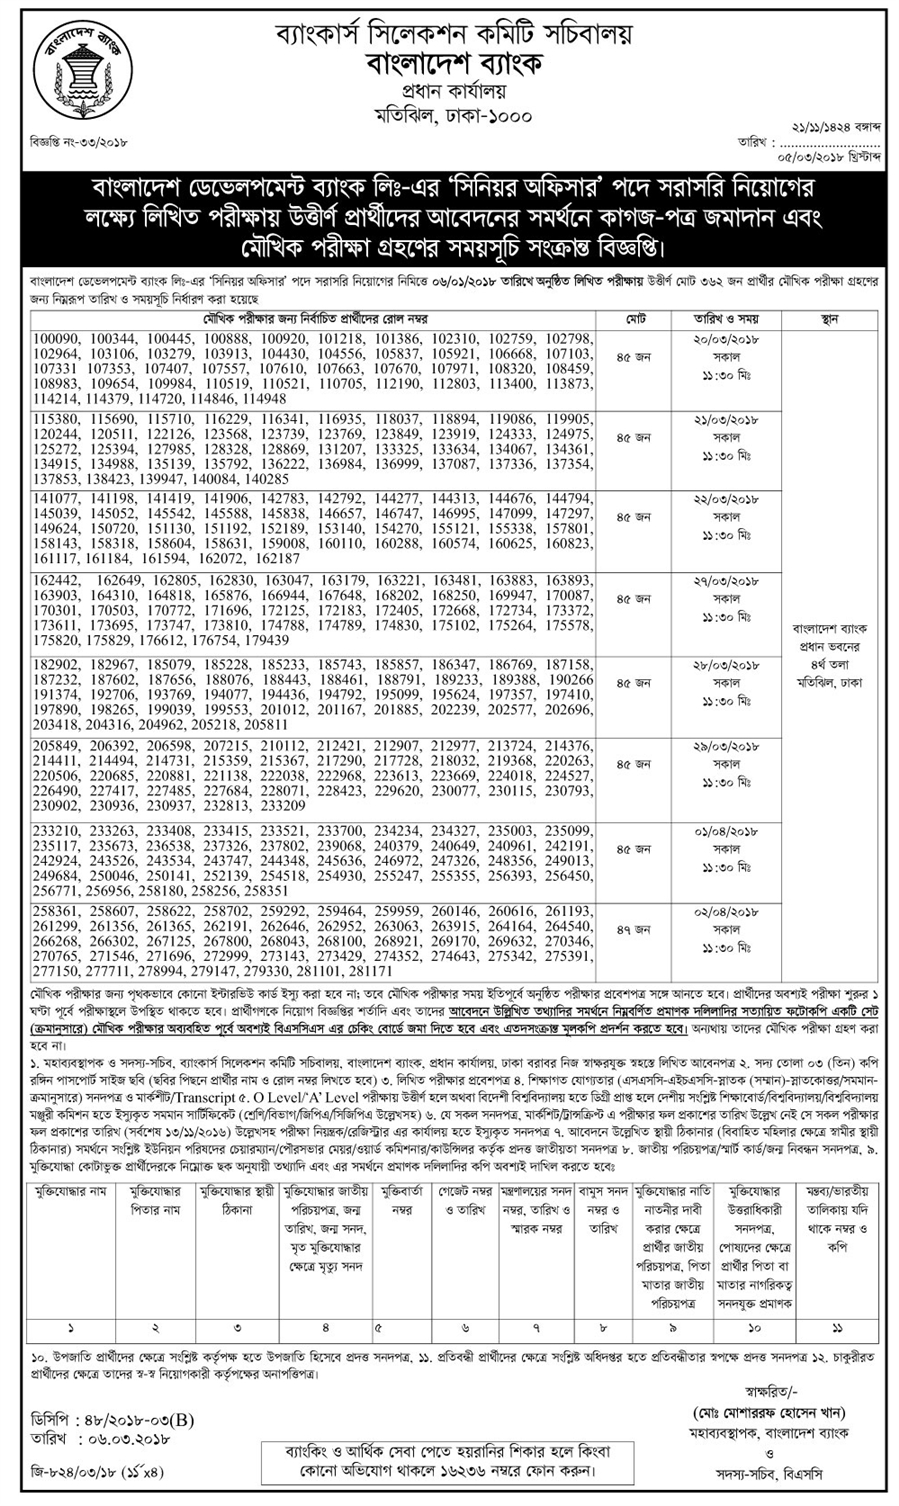 Bangladesh Development Bank Limited (BDBL) Senior Officer Written Test Result and Paper Submit date, Viva Test Exam Date, Time and Seat Plan